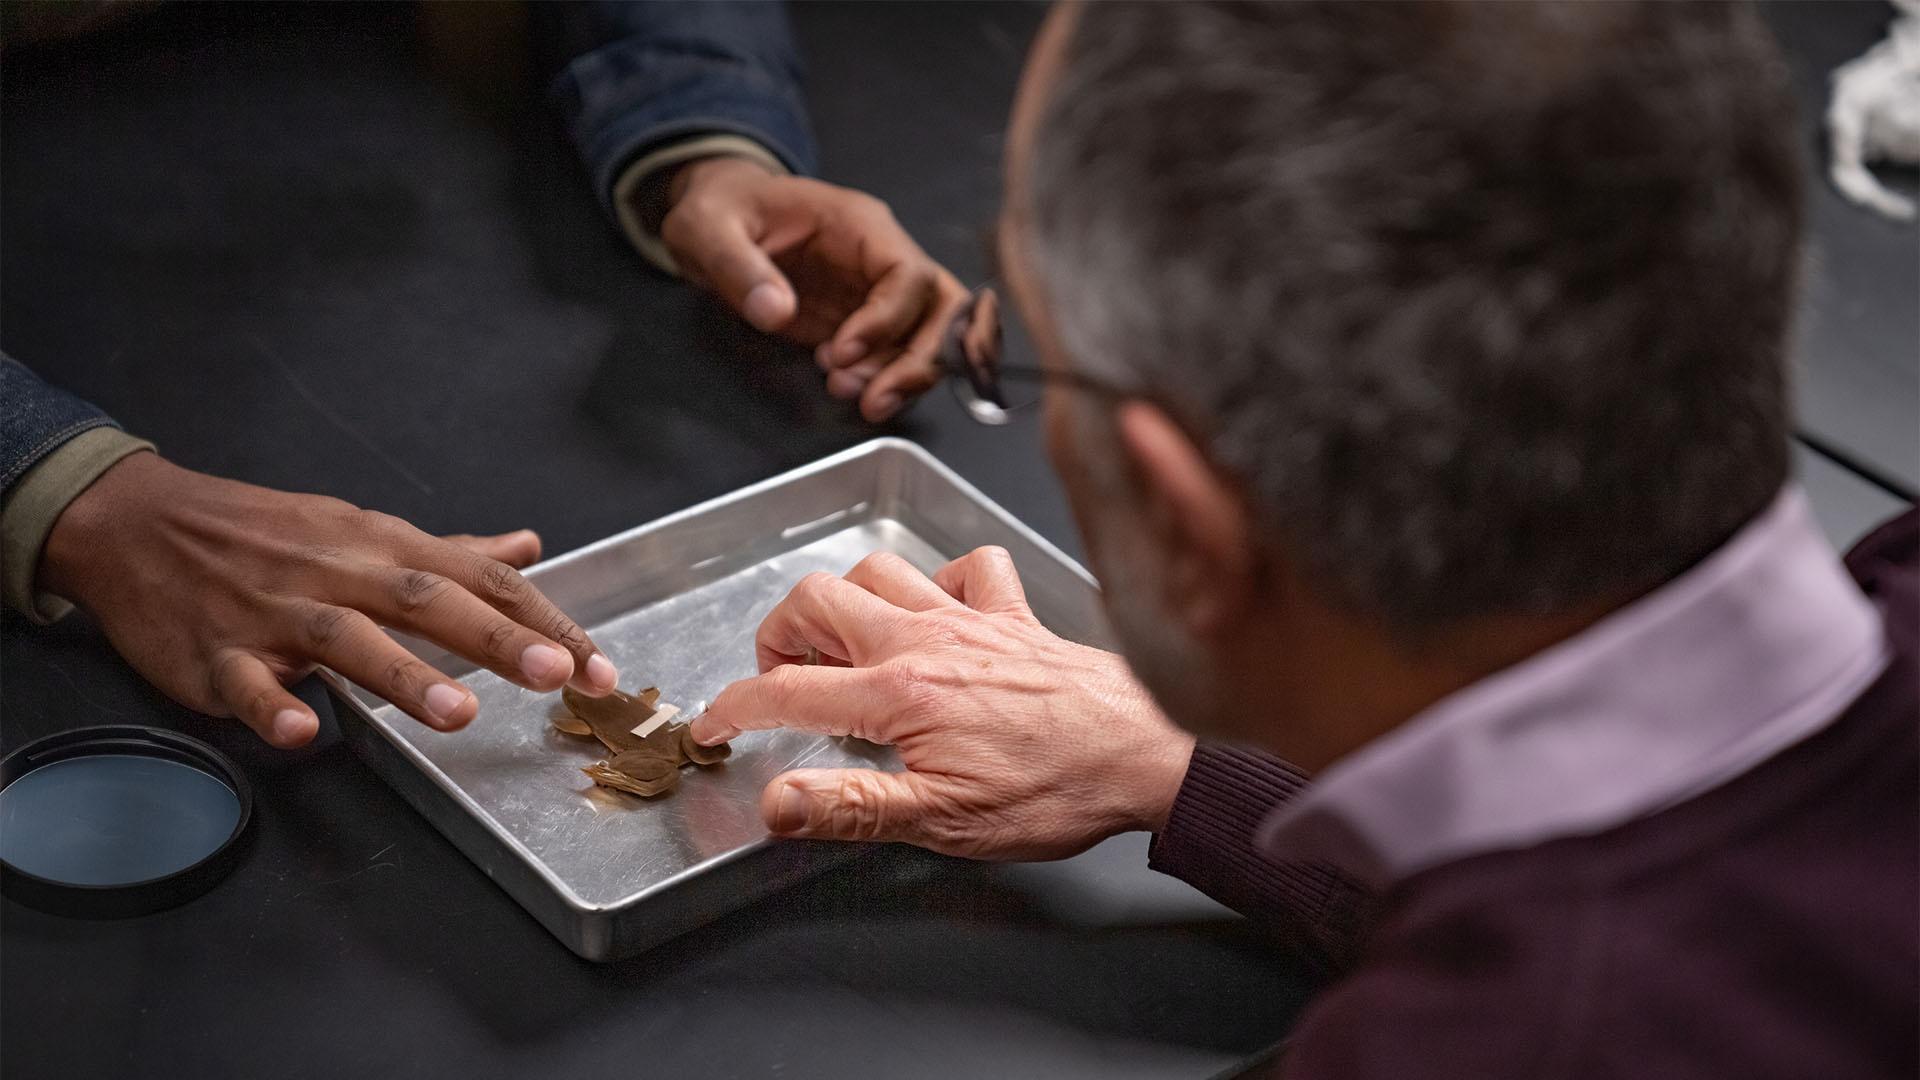 James Hanken, curator of herpetology, shows Shane a specimen of the African Clawed Frog.